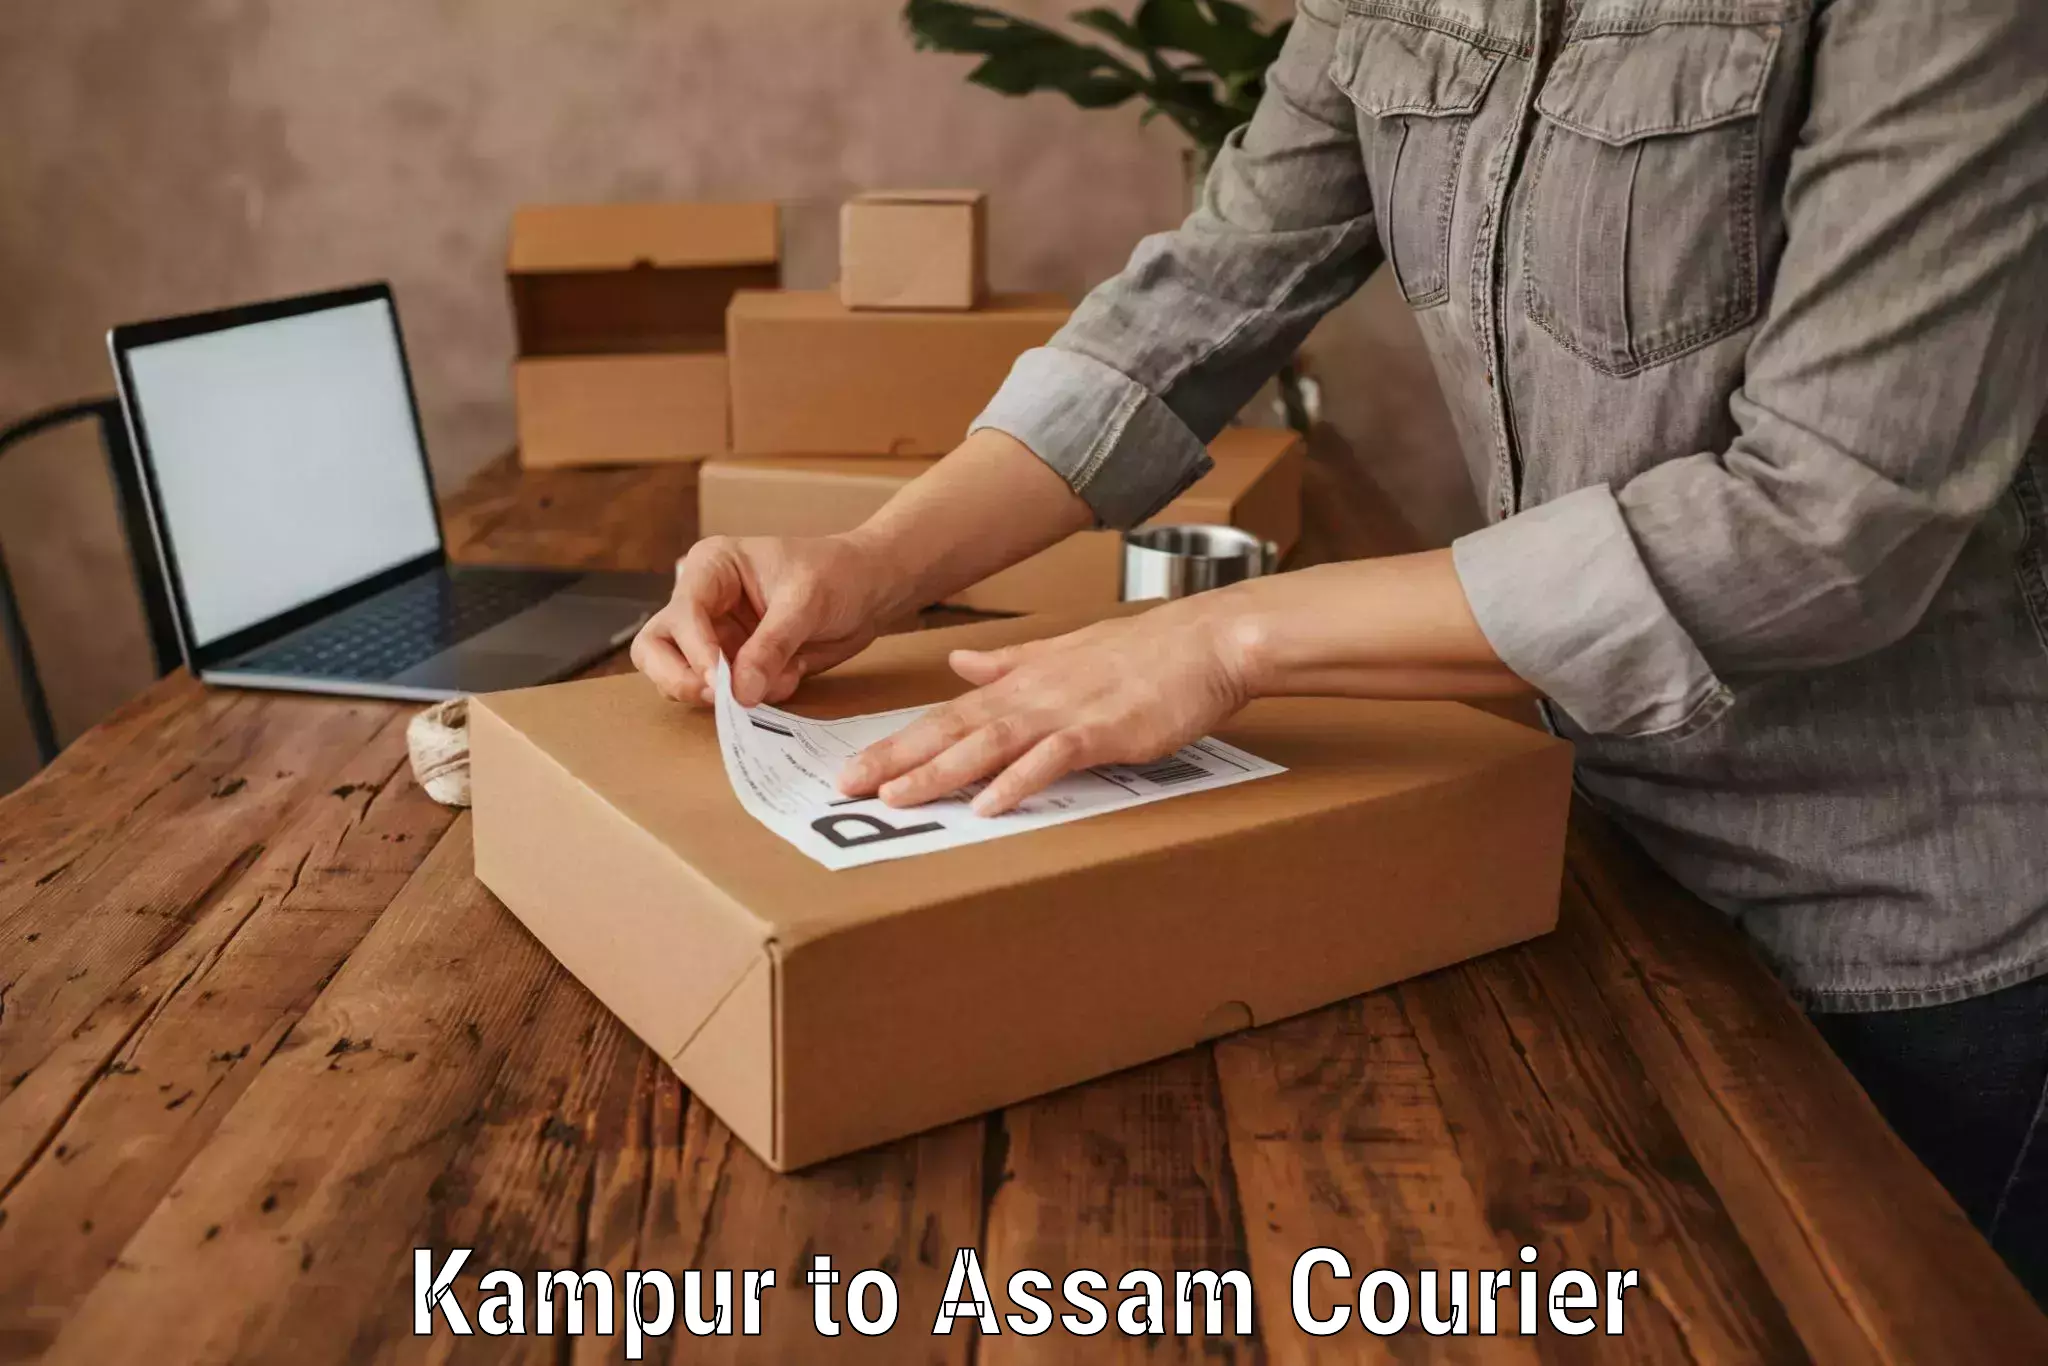 Luggage transport company Kampur to Assam